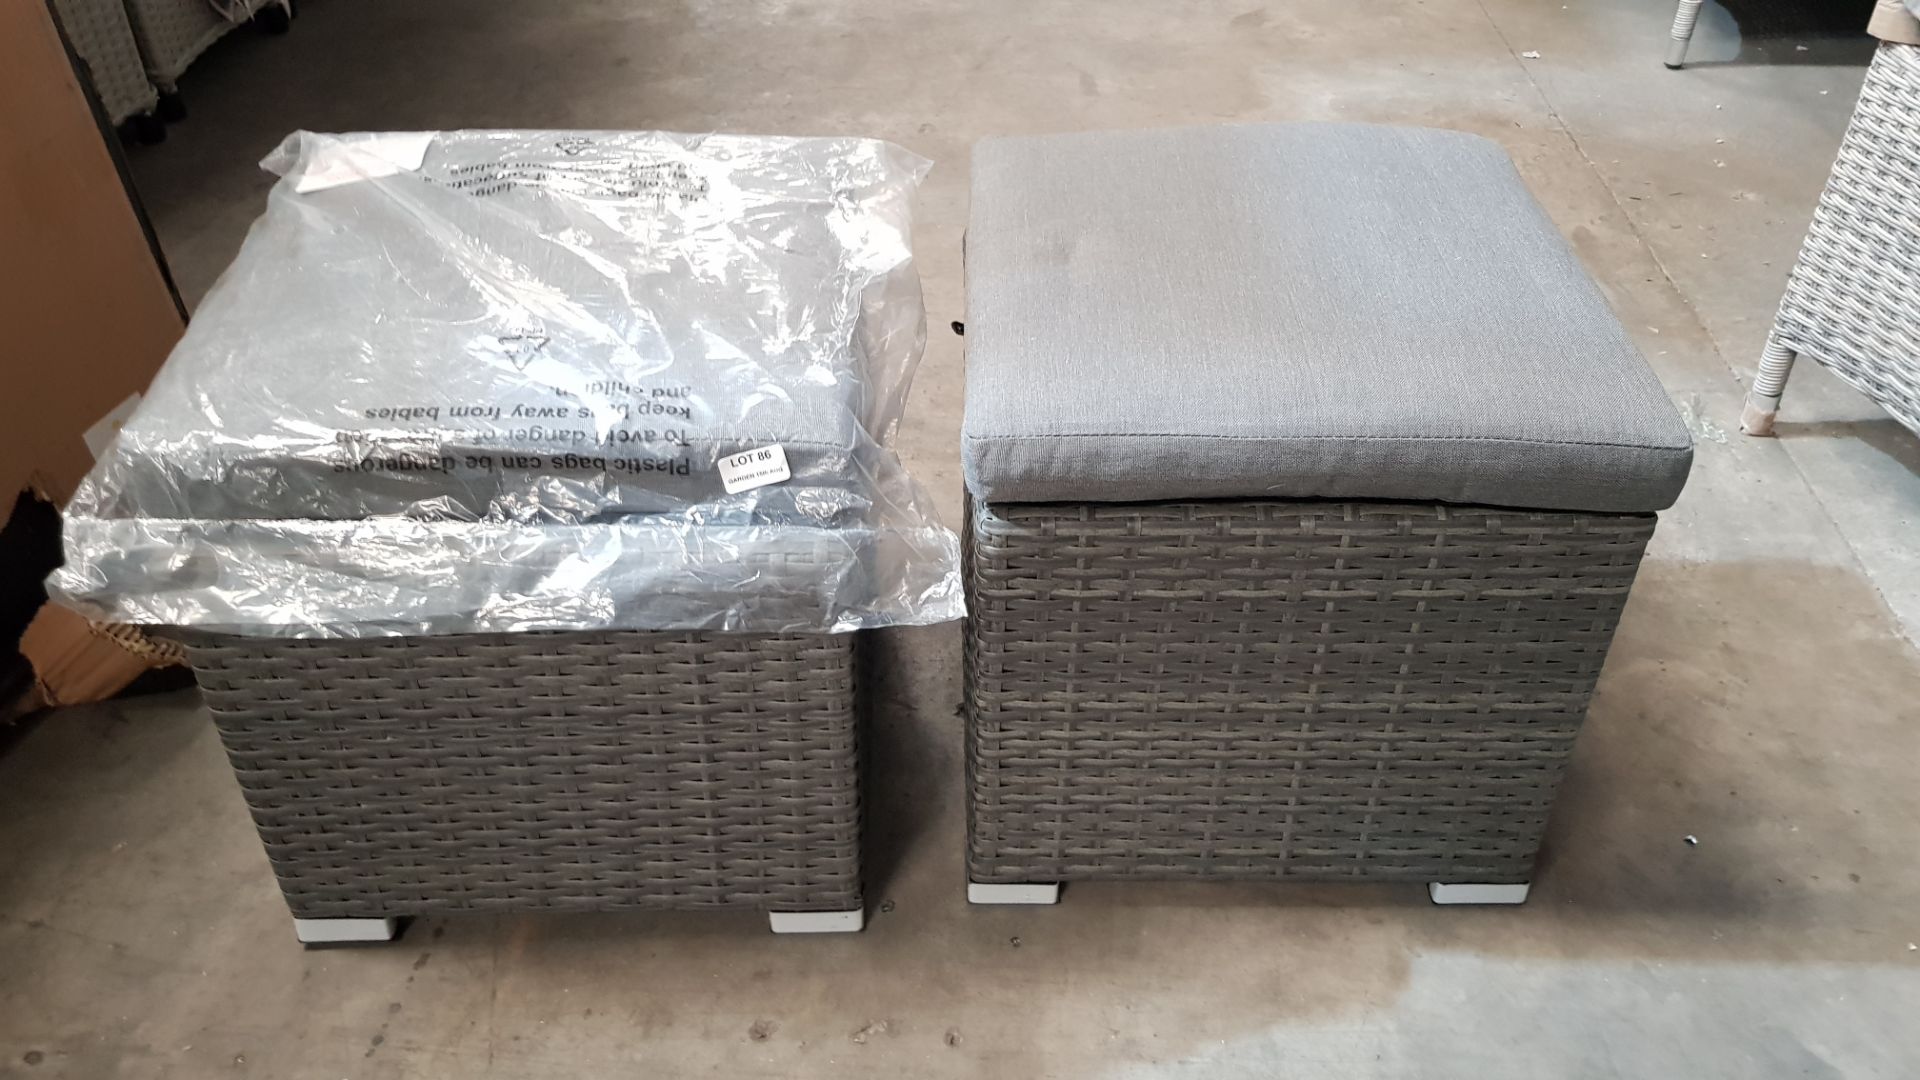 (R7L) 2x Grey Rattan Stool With 2x Cushions. Units Appear As New. - Image 3 of 3